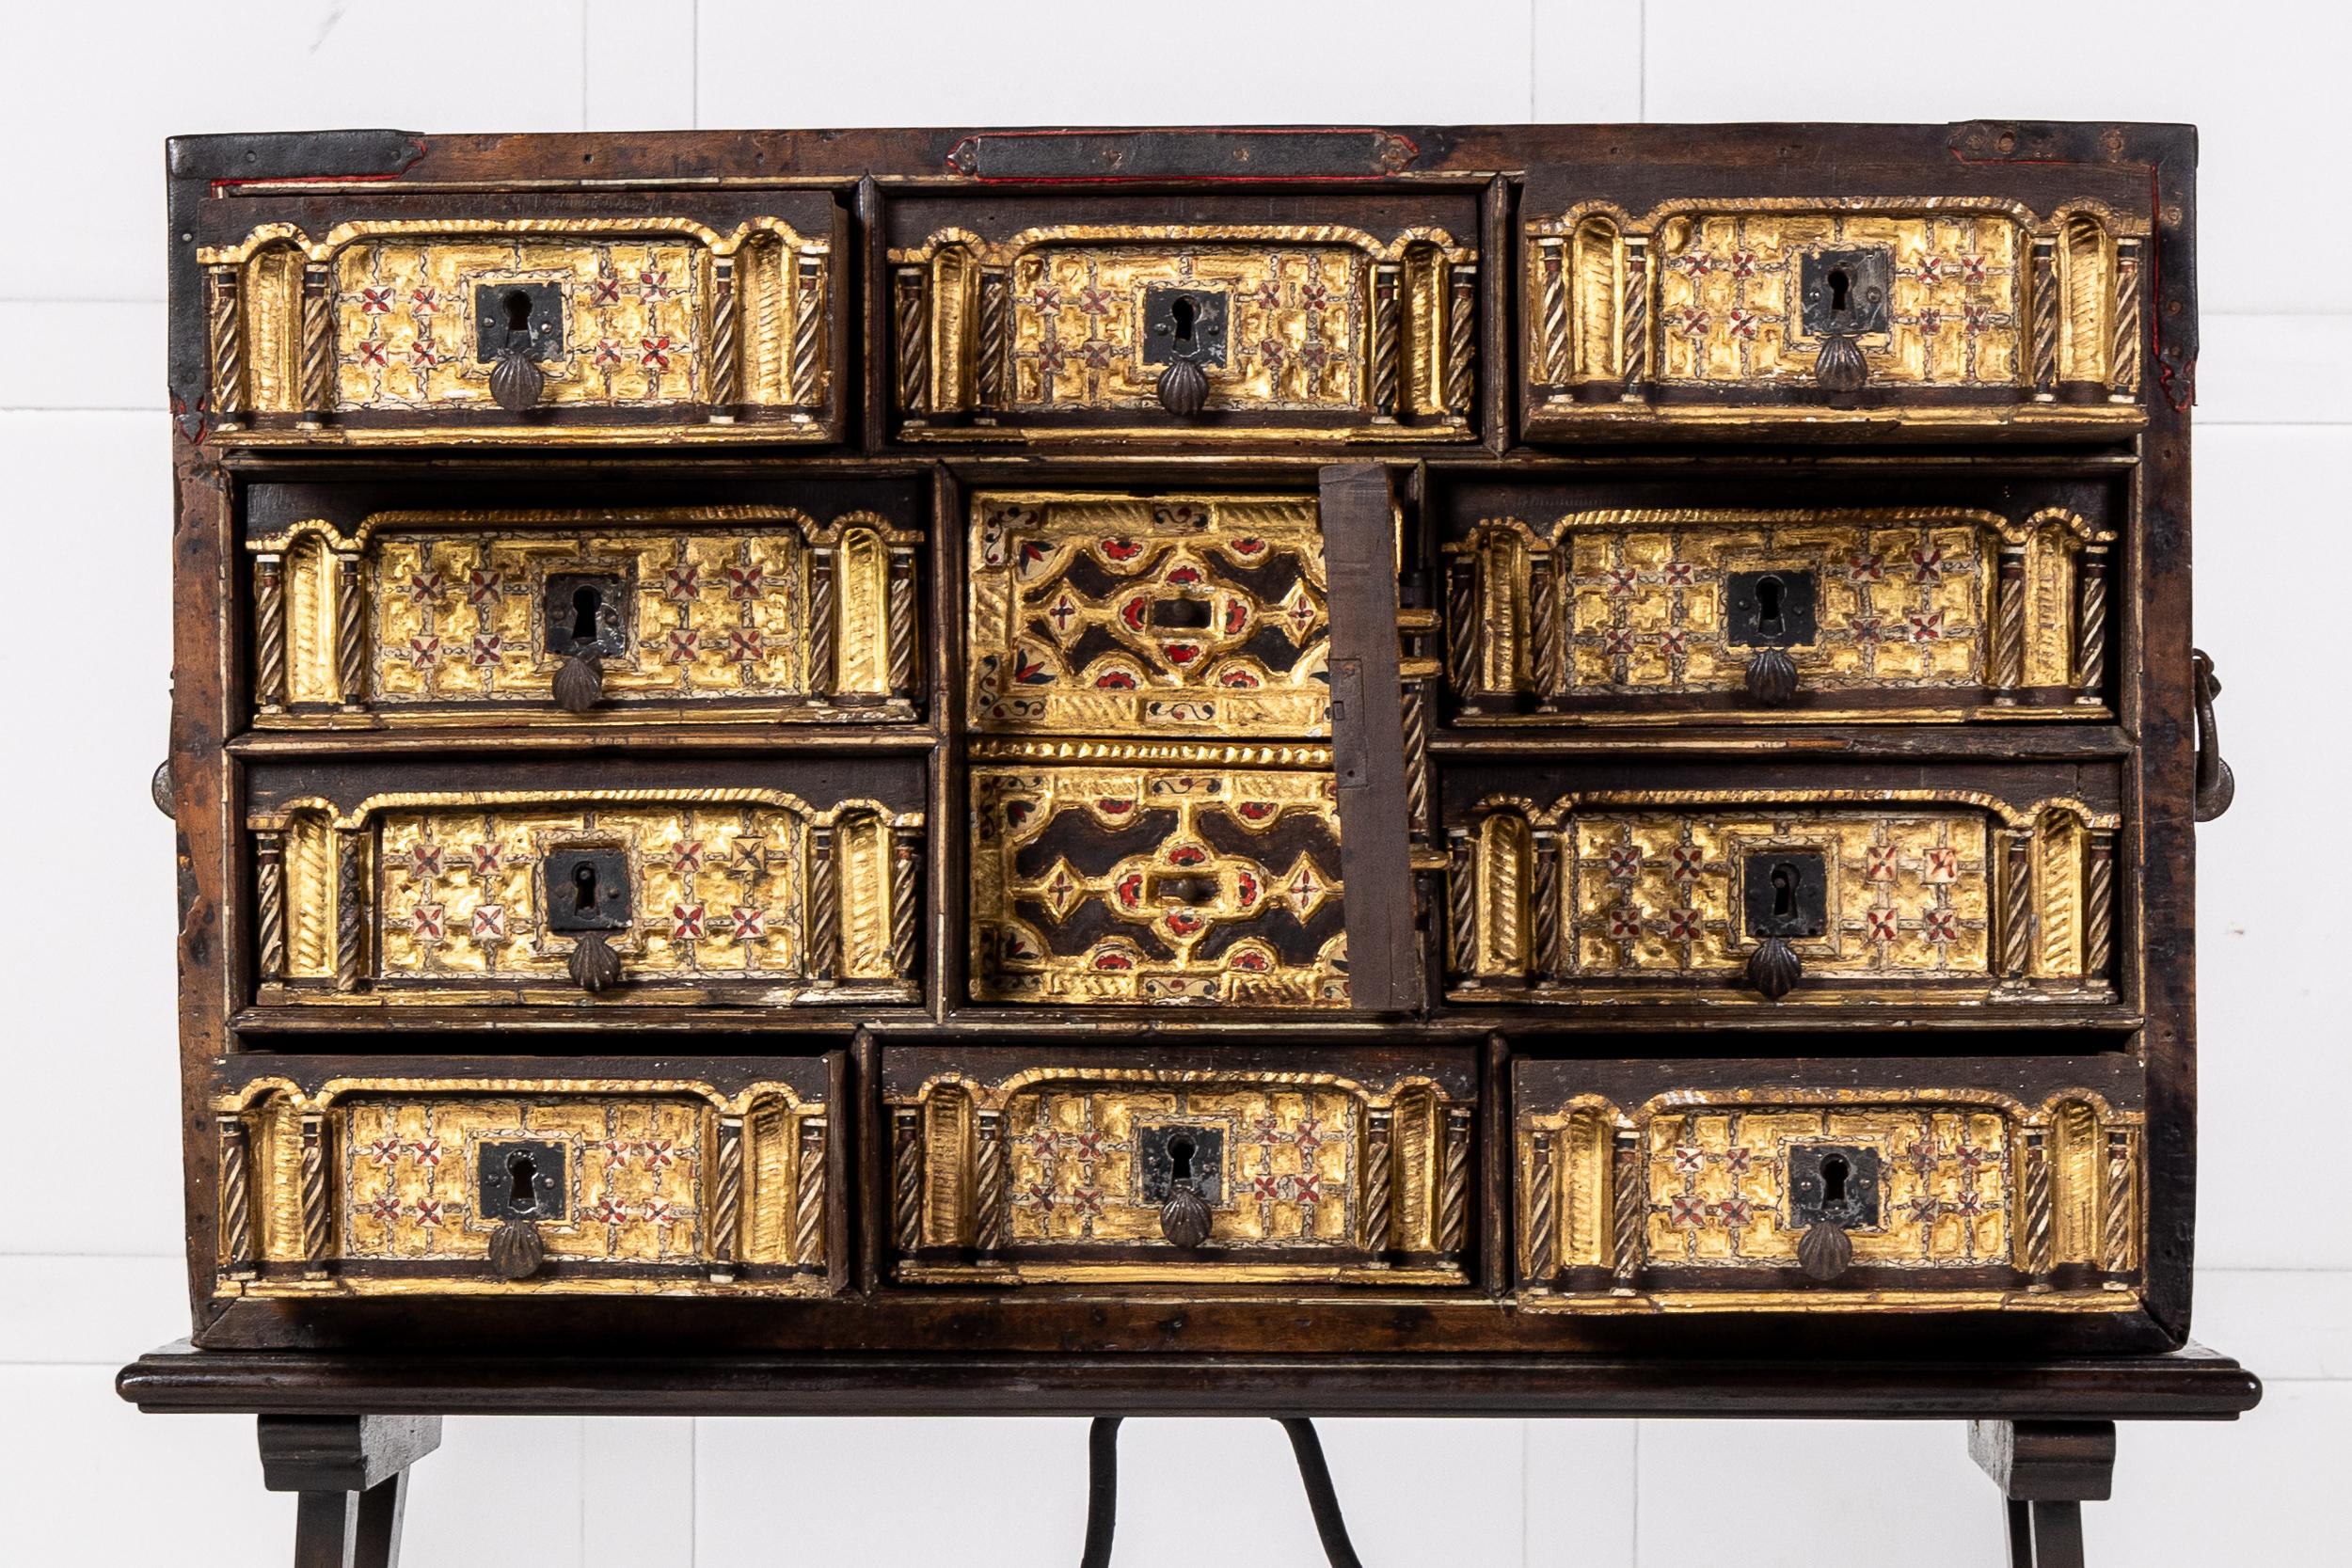 A Very Fine 17th Century Spanish Bargueño Vargas Cabinet on Later 19th Century Stand.

The Bargueño consisting of banks of drawers and a central door concealing two more small drawers. This style of cabinet was a speciality in Spain with examples